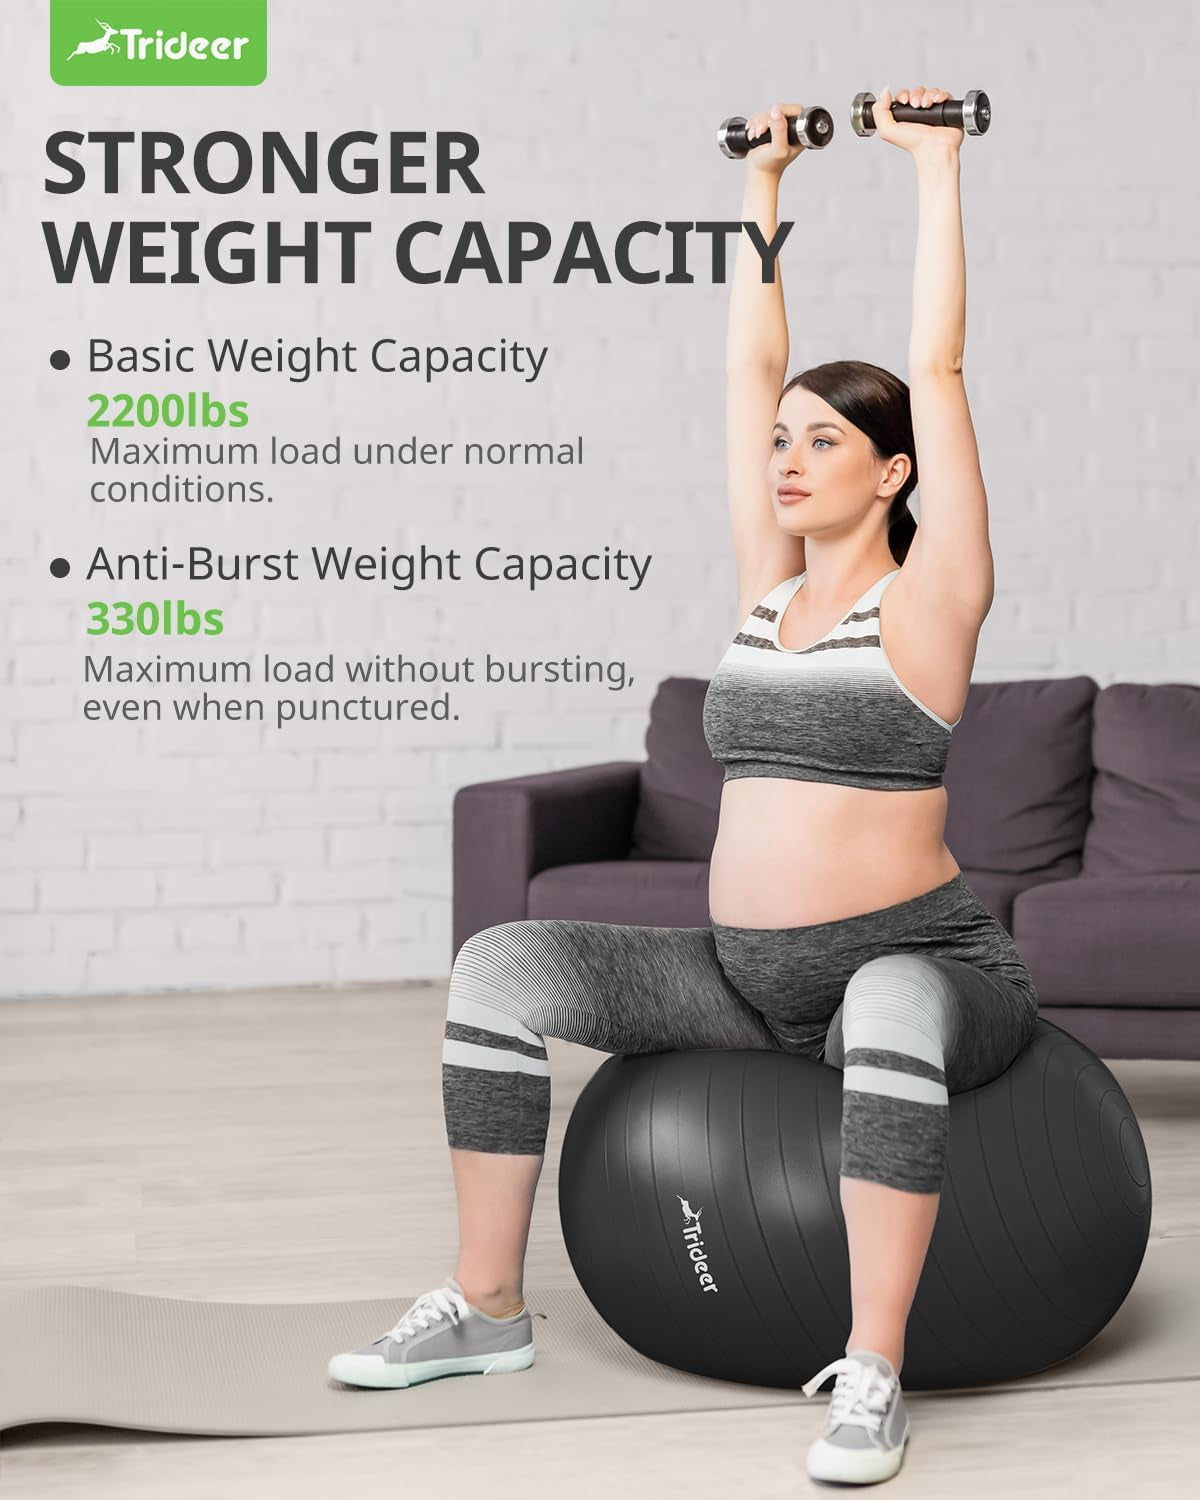 Yoga Ball Exercise Ball for Working Out, 5 Sizes Gym Ball, Birthing Ball for Pregnancy, Swiss Ball for Physical Therapy, Balance, Stability, Fitness, Office Ball Chair, Quick Pump Included